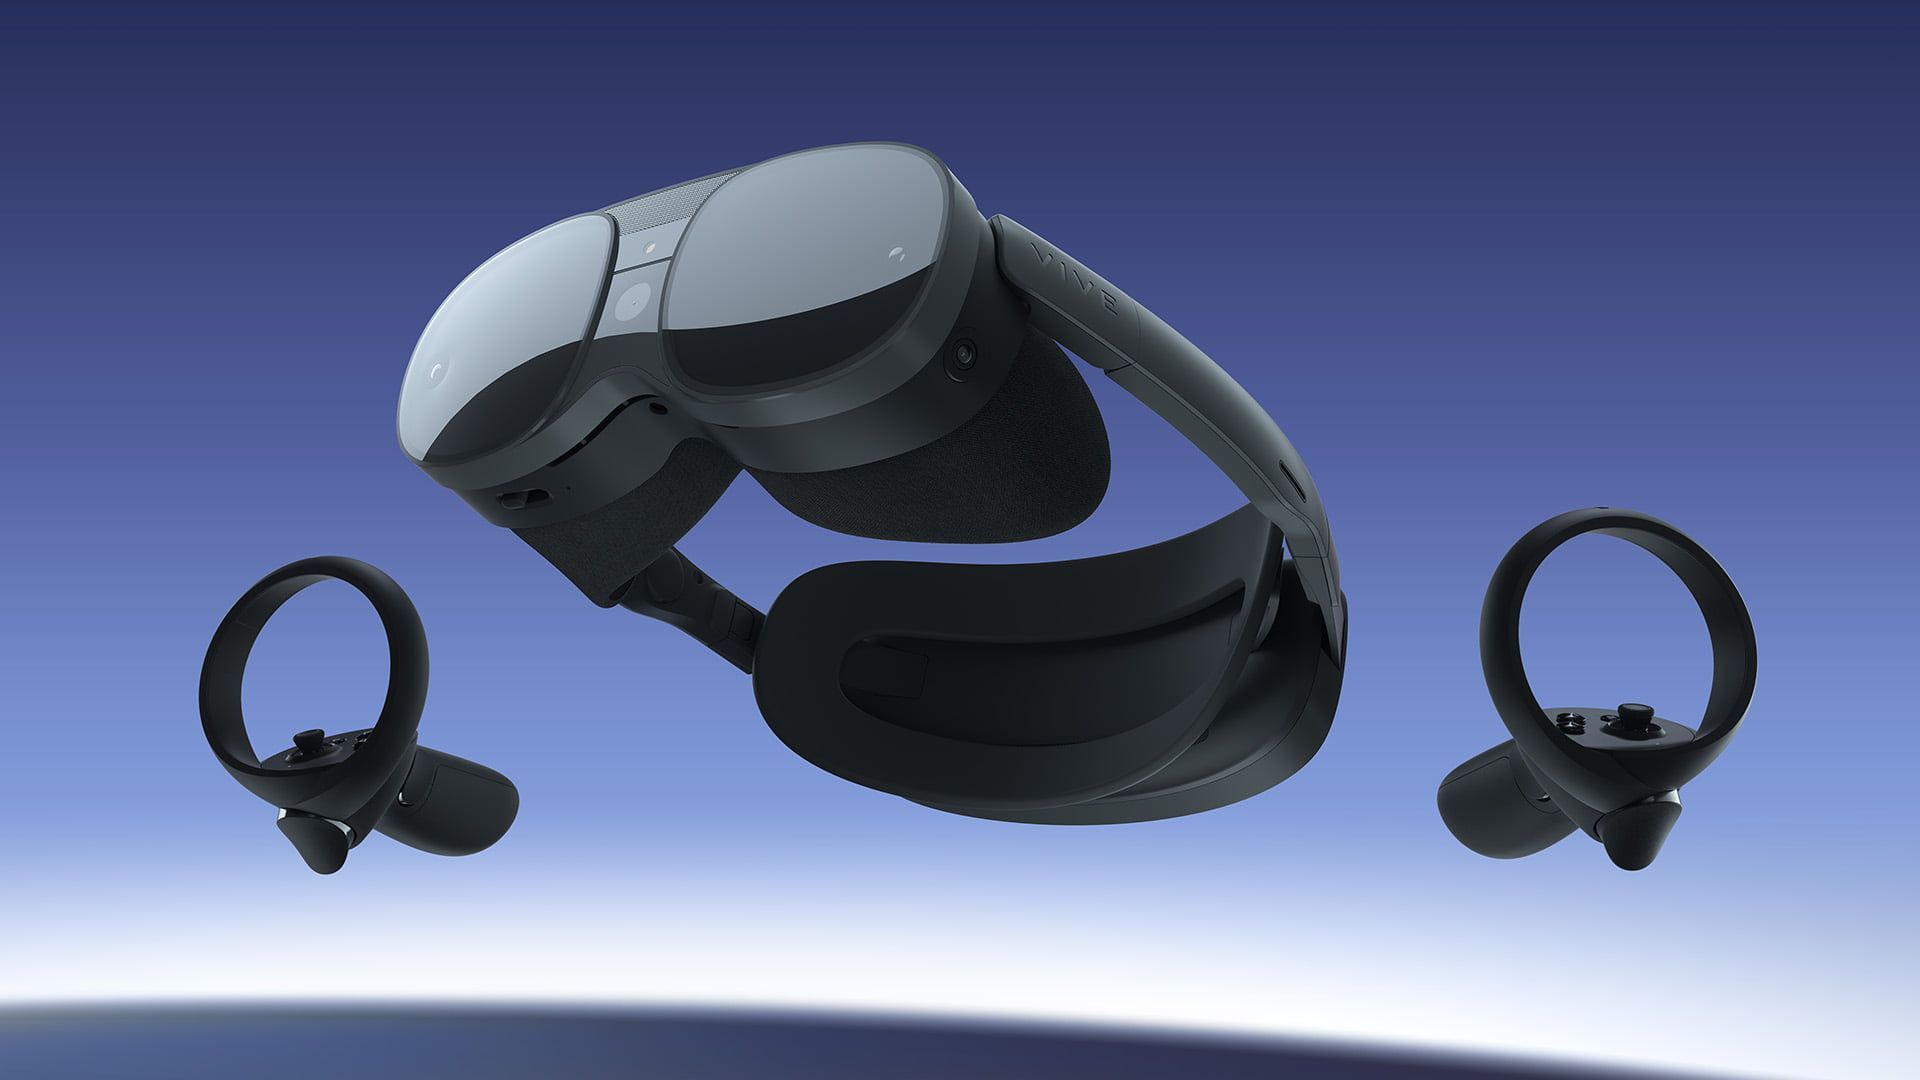 Vive XR Elite is announced: Specs, price and release date